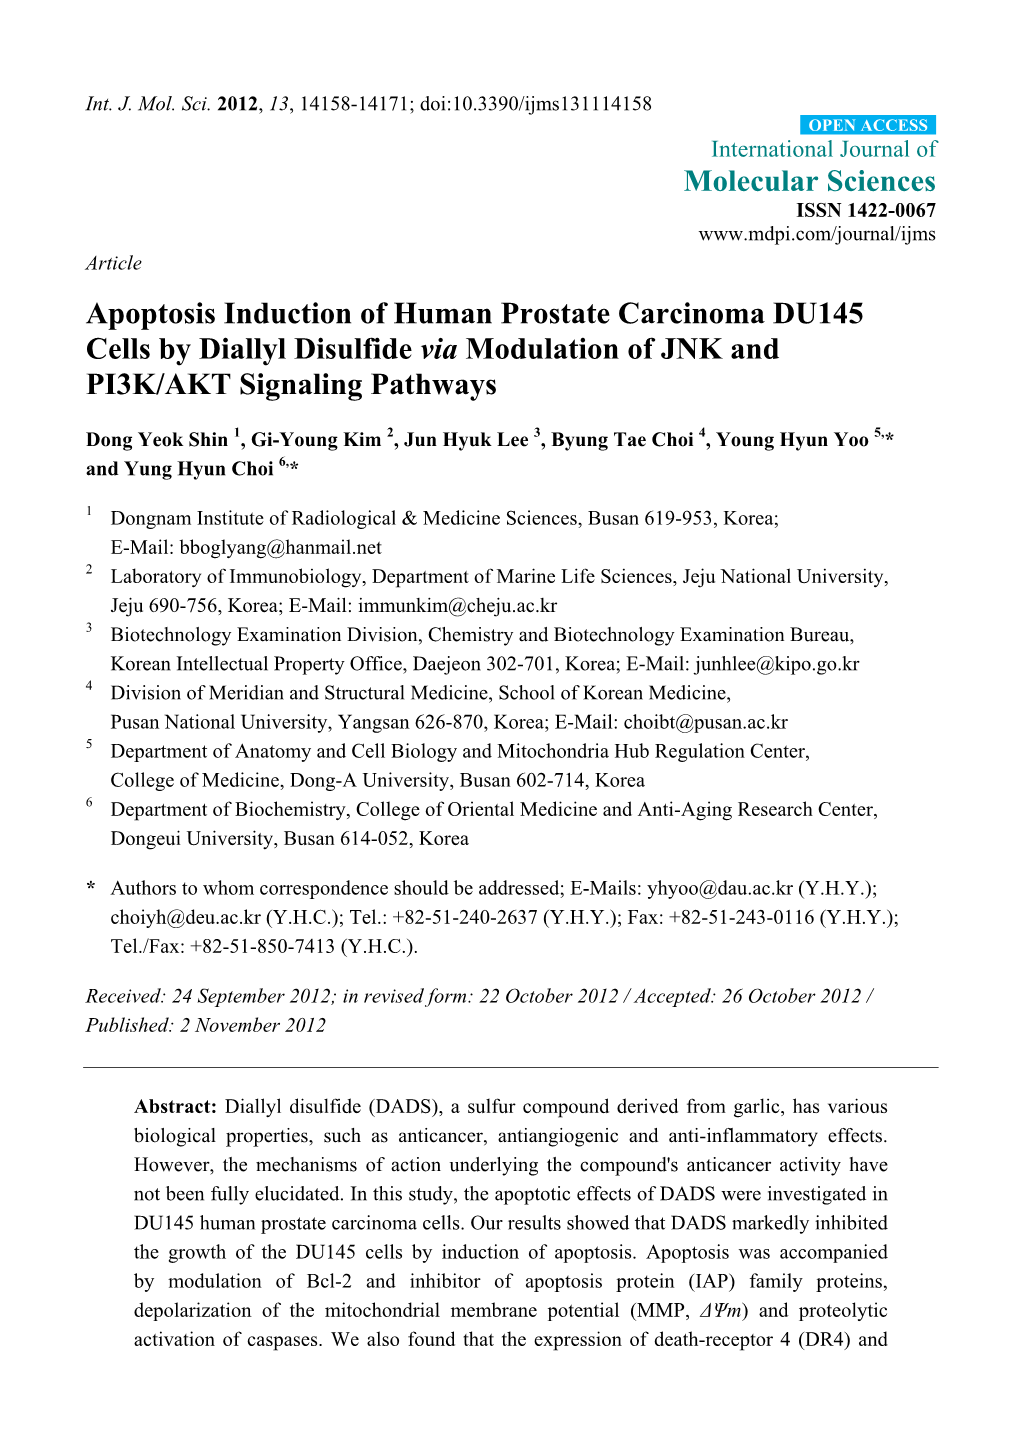 Apoptosis Induction of Human Prostate Carcinoma DU145 Cells by Diallyl Disulfide Via Modulation of JNK and PI3K/AKT Signaling Pathways